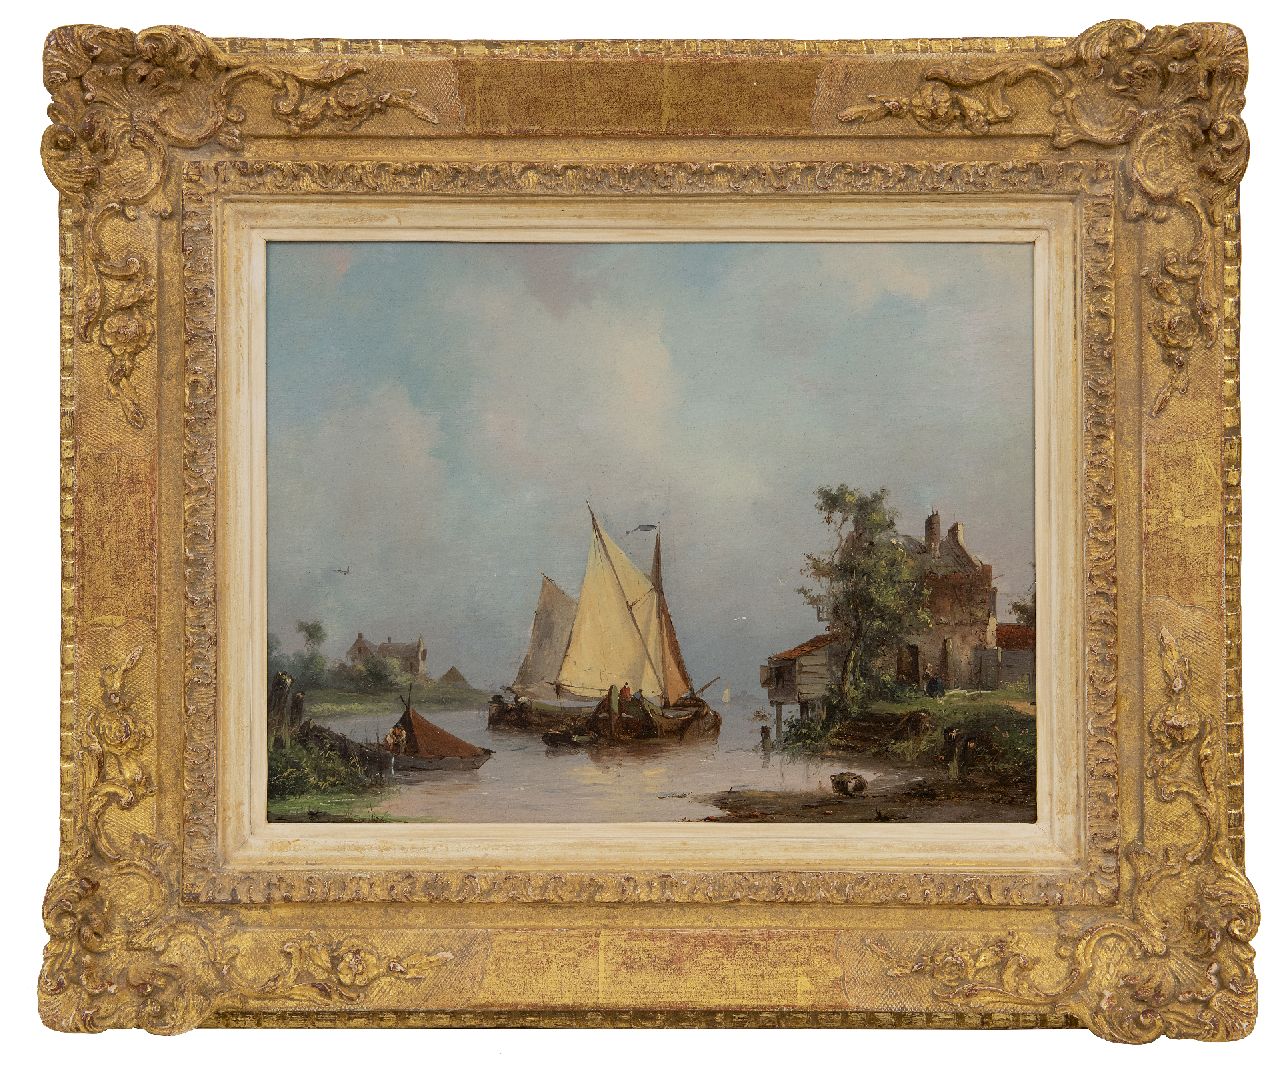 Hilleveld A.D.  | Adrianus David Hilleveld | Paintings offered for sale | Sailing ships on a river, oil on panel 24.8 x 32.3 cm